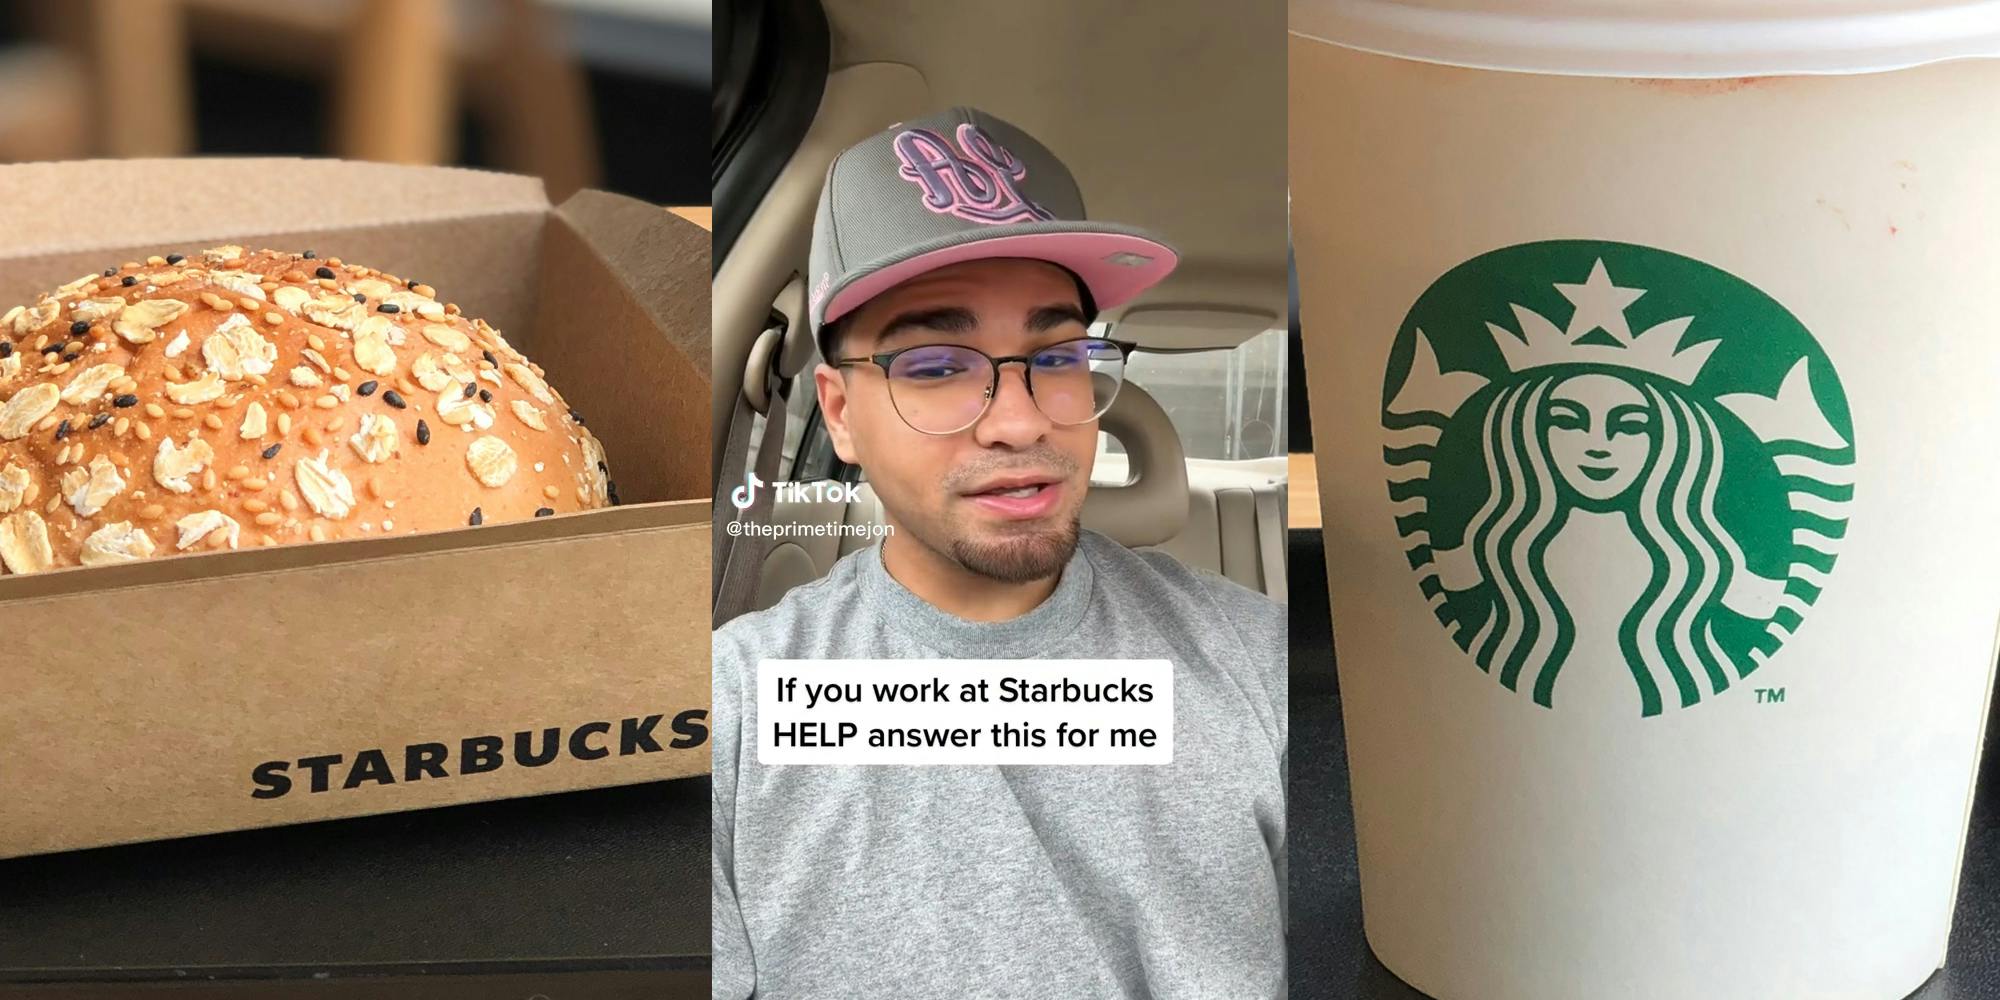 man in car with starbucks coffee and bread